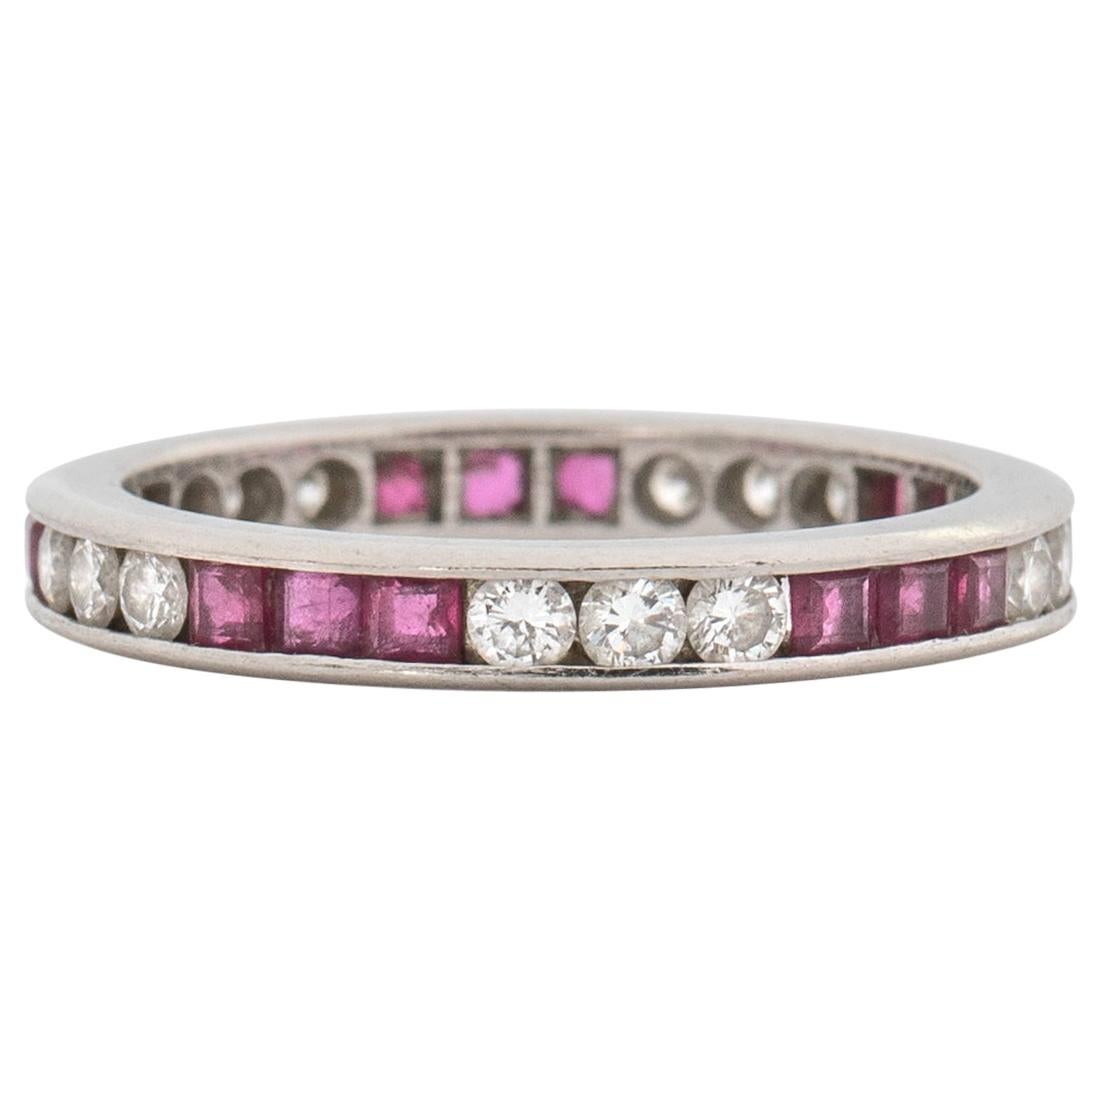 1970s Diamond and Ruby Ring Band in Platinum